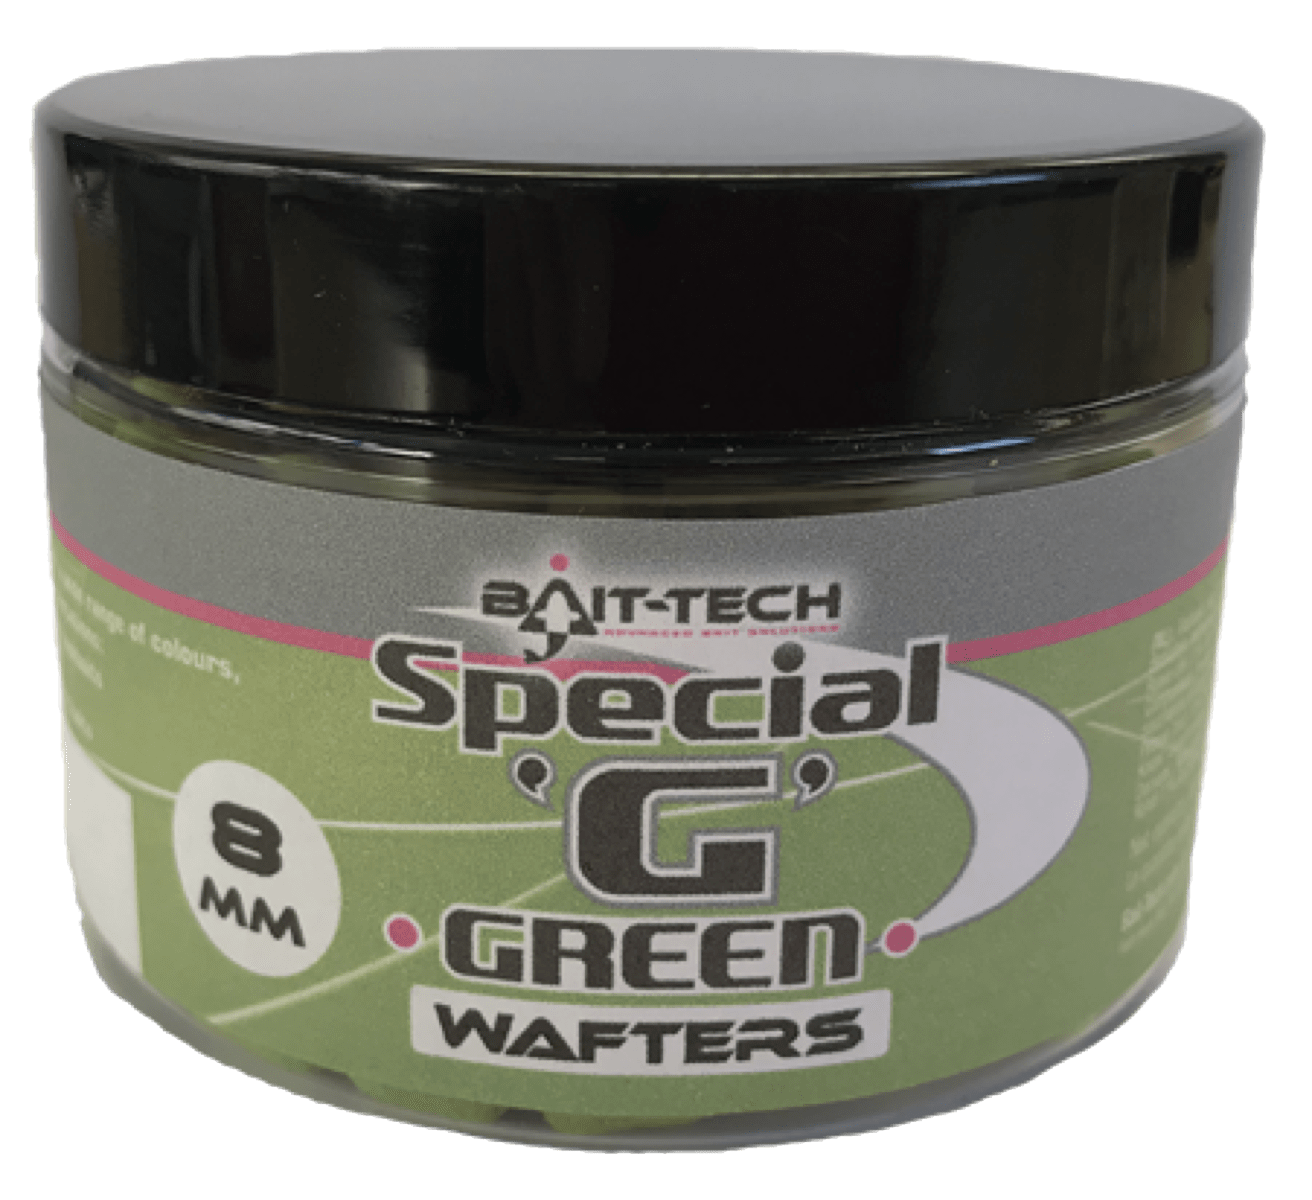 Bait-Tech special G dumbell wafters 8mm green